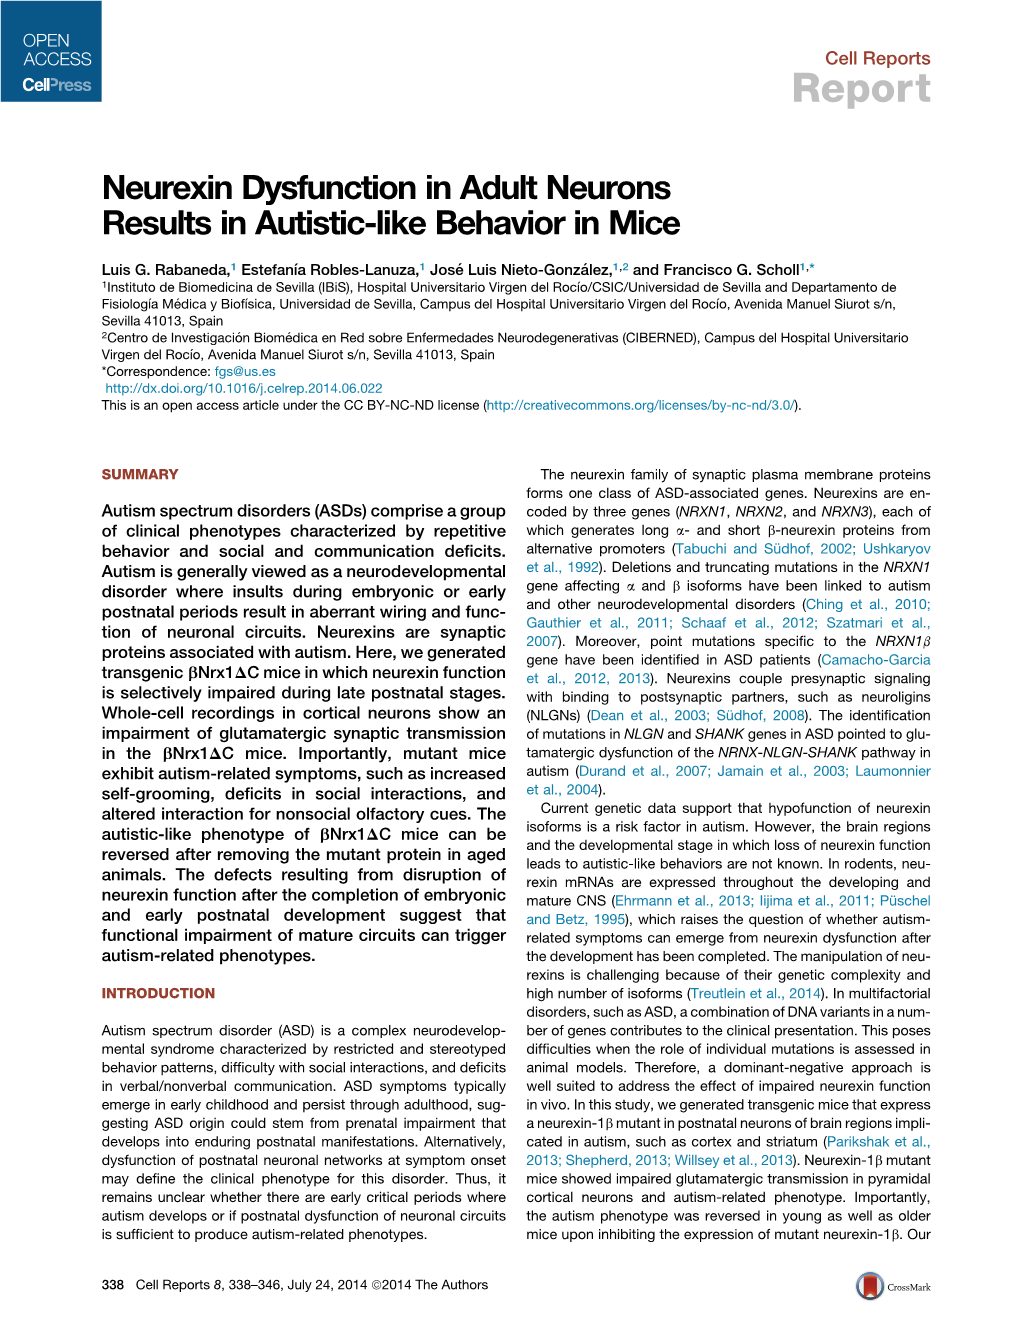 Neurexin Dysfunction in Adult Neurons Results in Autistic-Like Behavior in Mice